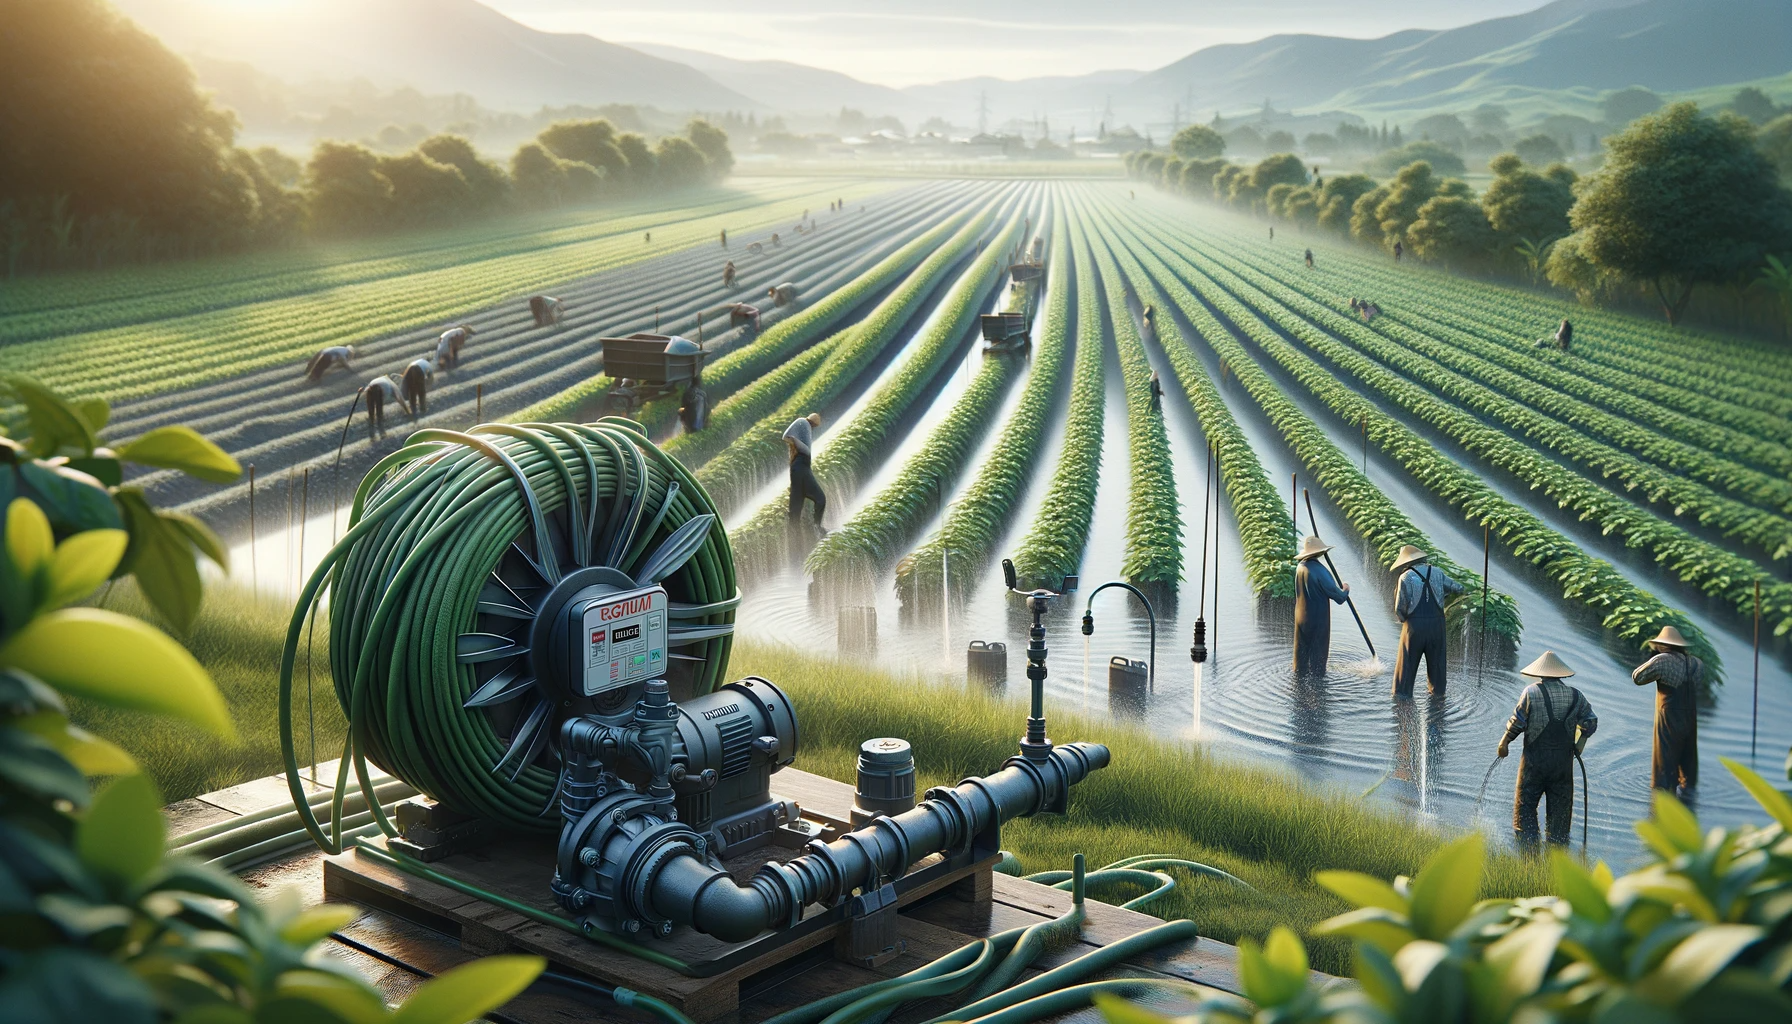 Tsurumi pumps being used for irrigation on a lush green farm with farmers adjusting the equipment.